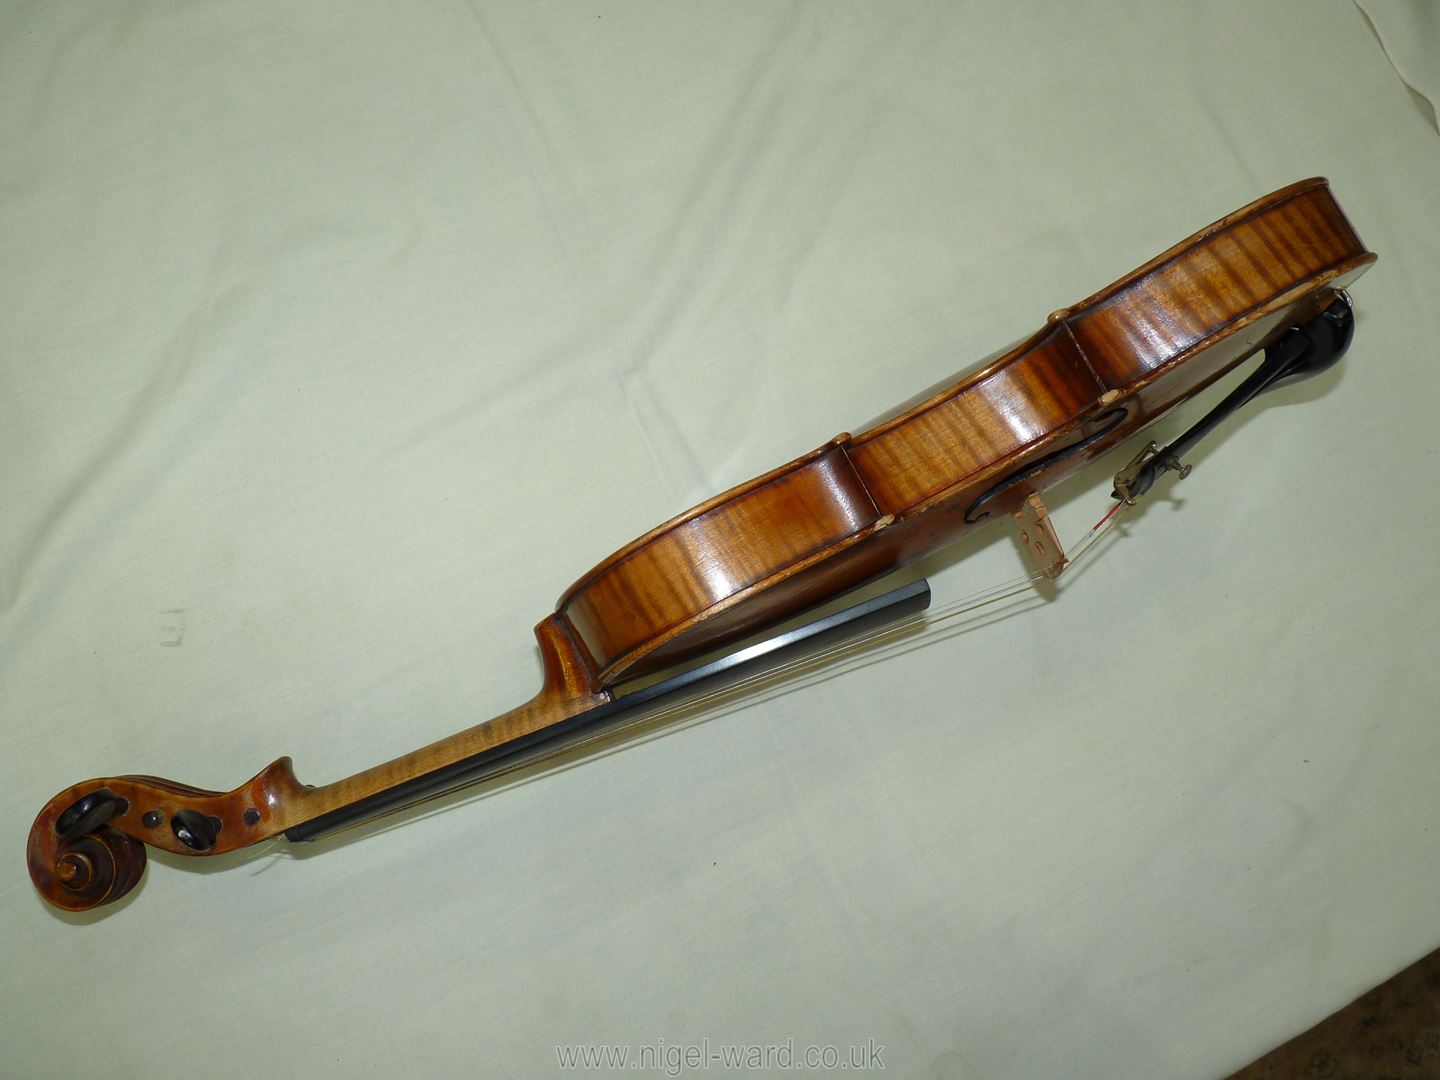 An antique violin having a well-carved scroll and nicely figured body including the back, - Image 7 of 49